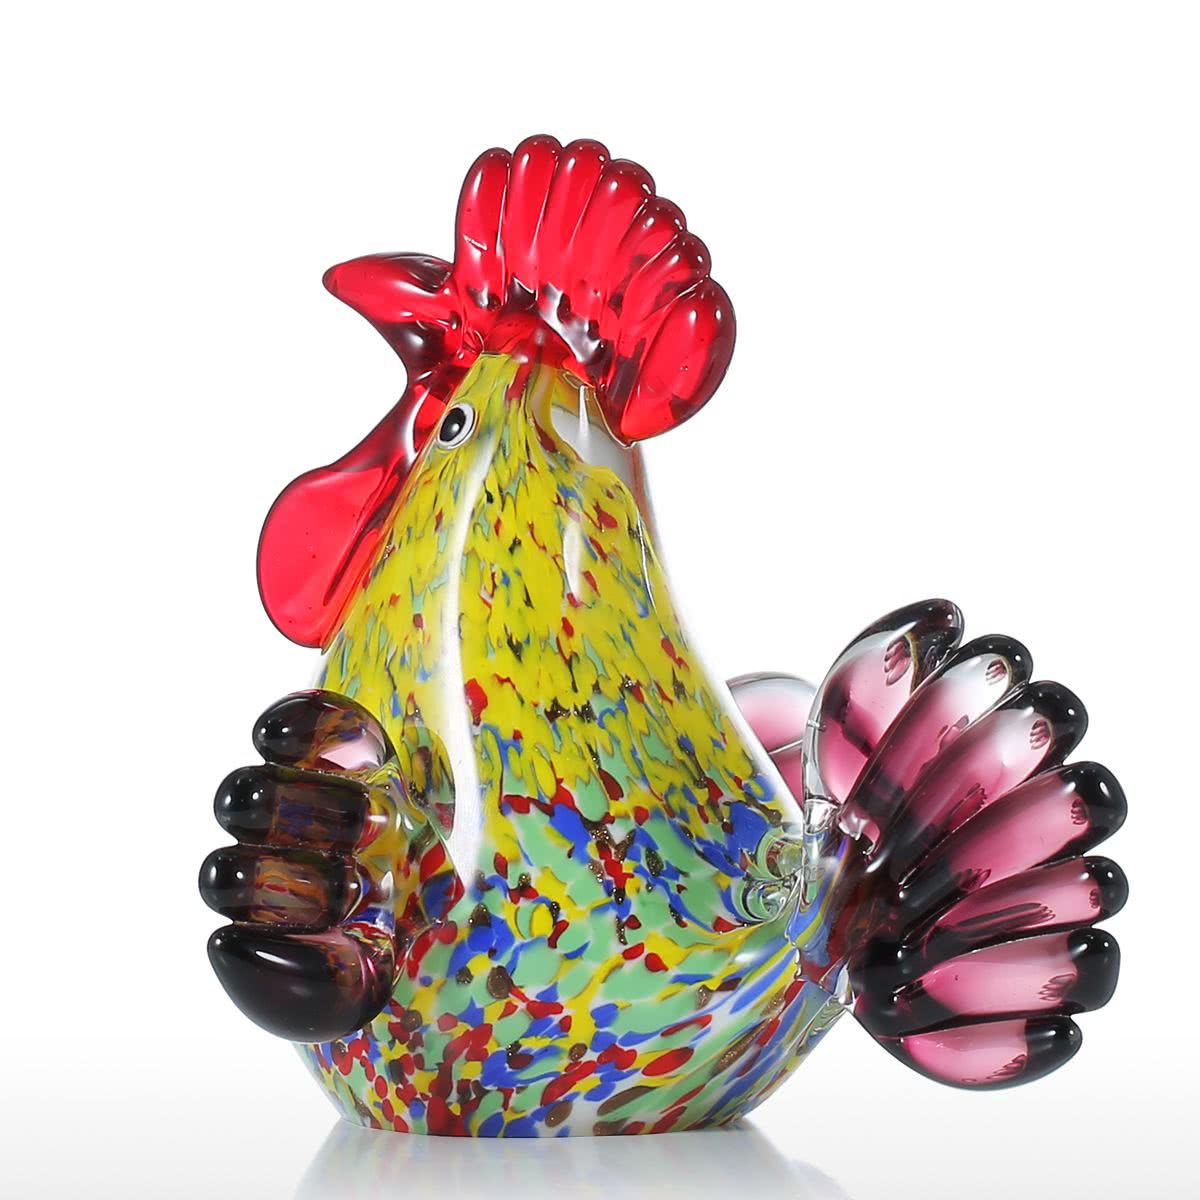 Rooster Kitchen Decor or Chicken Kitchen Decor for Glass Christmas Ornaments and Decorations